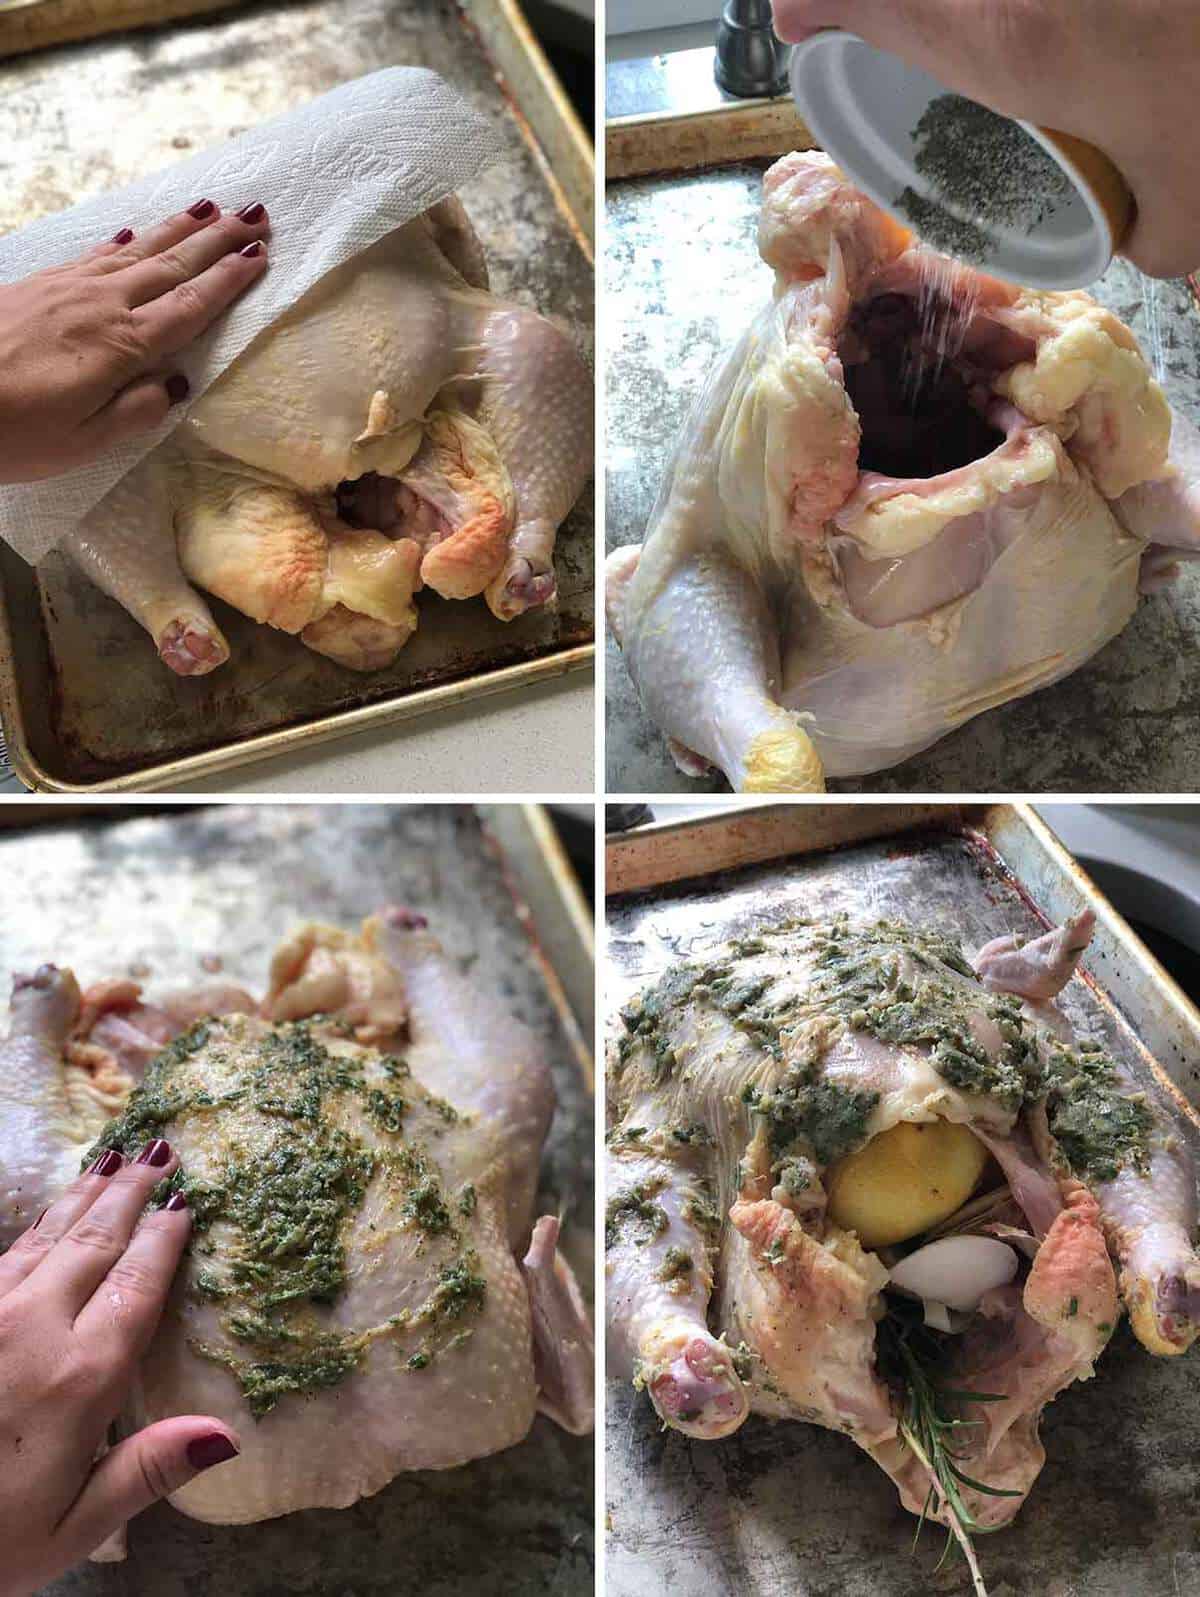 Patting a whole chicken dry, seasoning the cavity with salt and pepper, seasoning with lemon garlic rosemary butter, and adding lemon rinds and other scraps to the cavity.